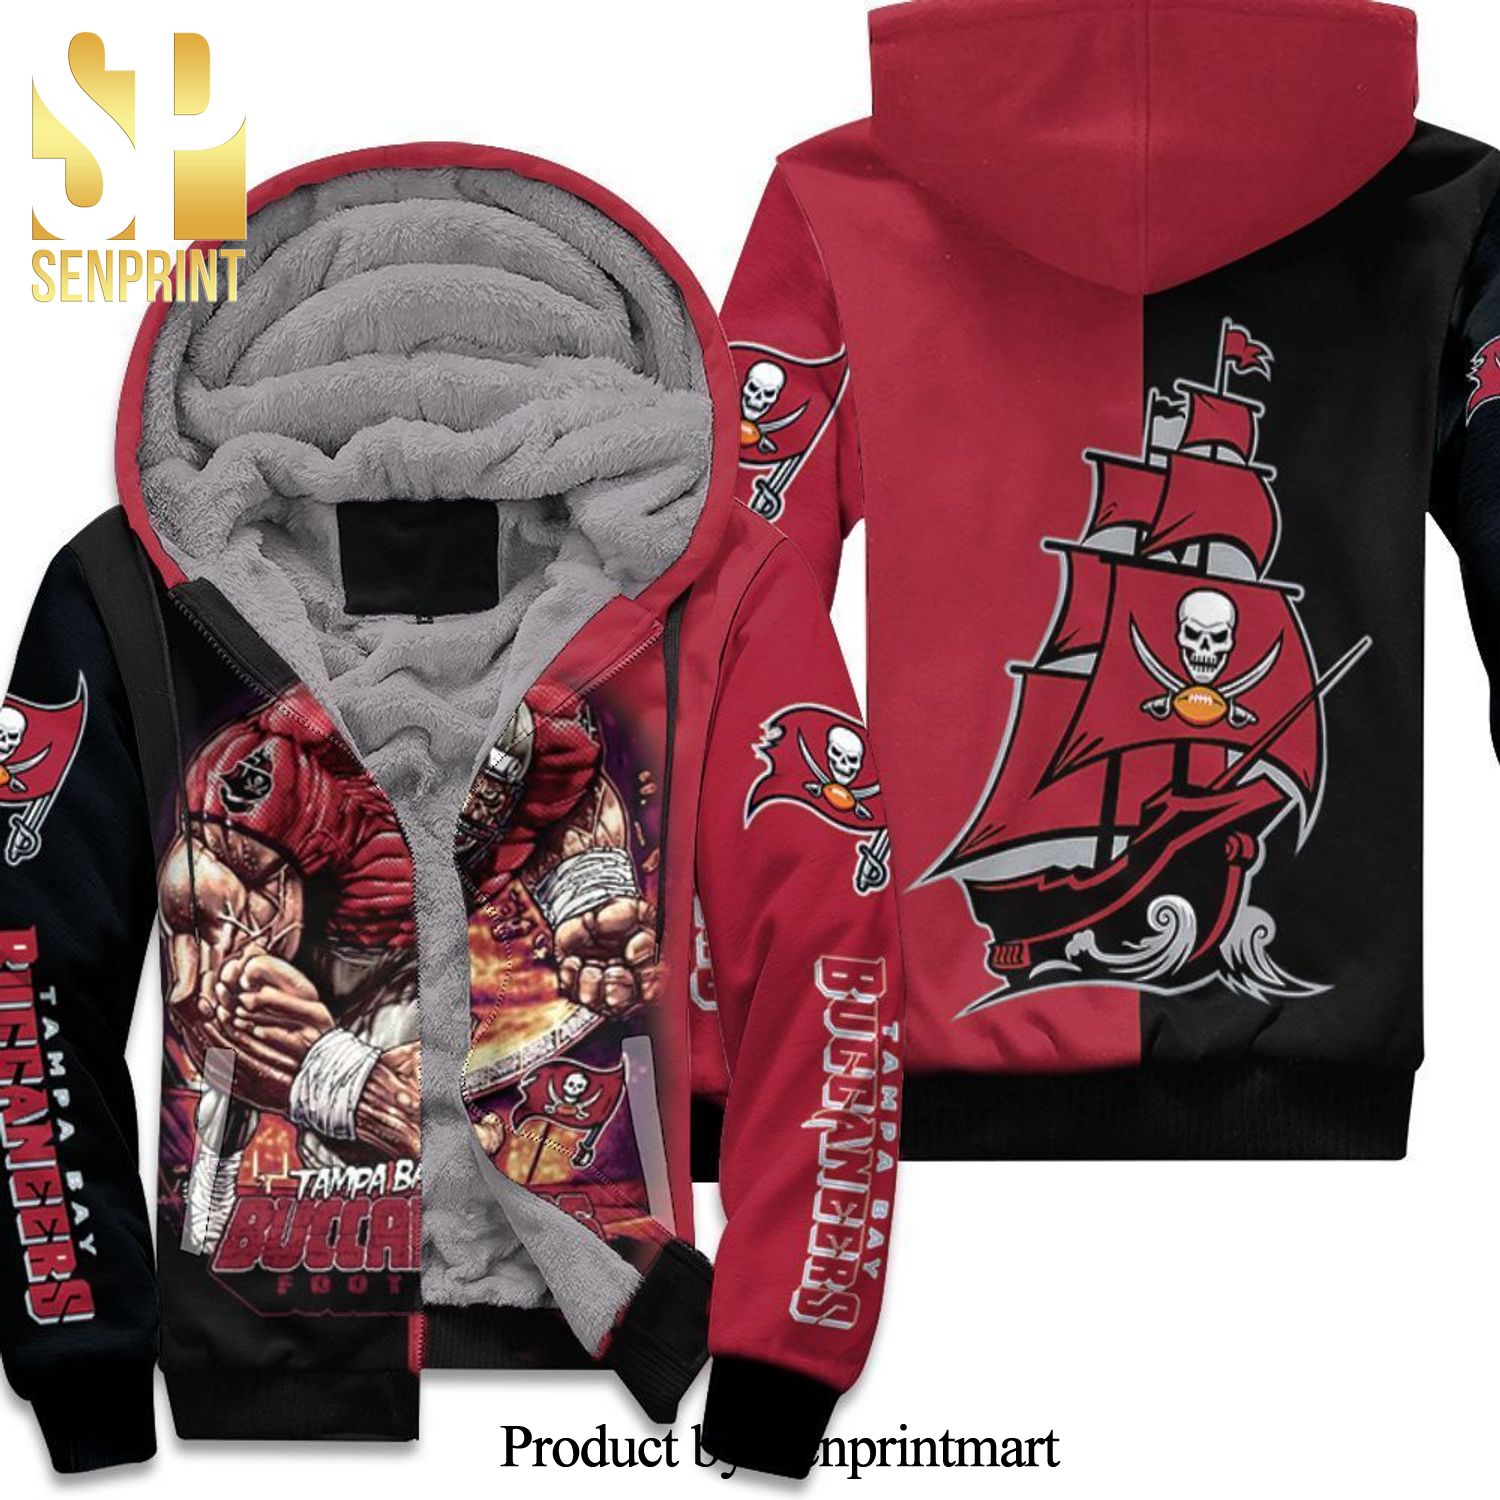 Giant Tampa Bay Buccaneers NFC South Division Champions Super Bowl Full Printed Unisex Fleece Hoodie